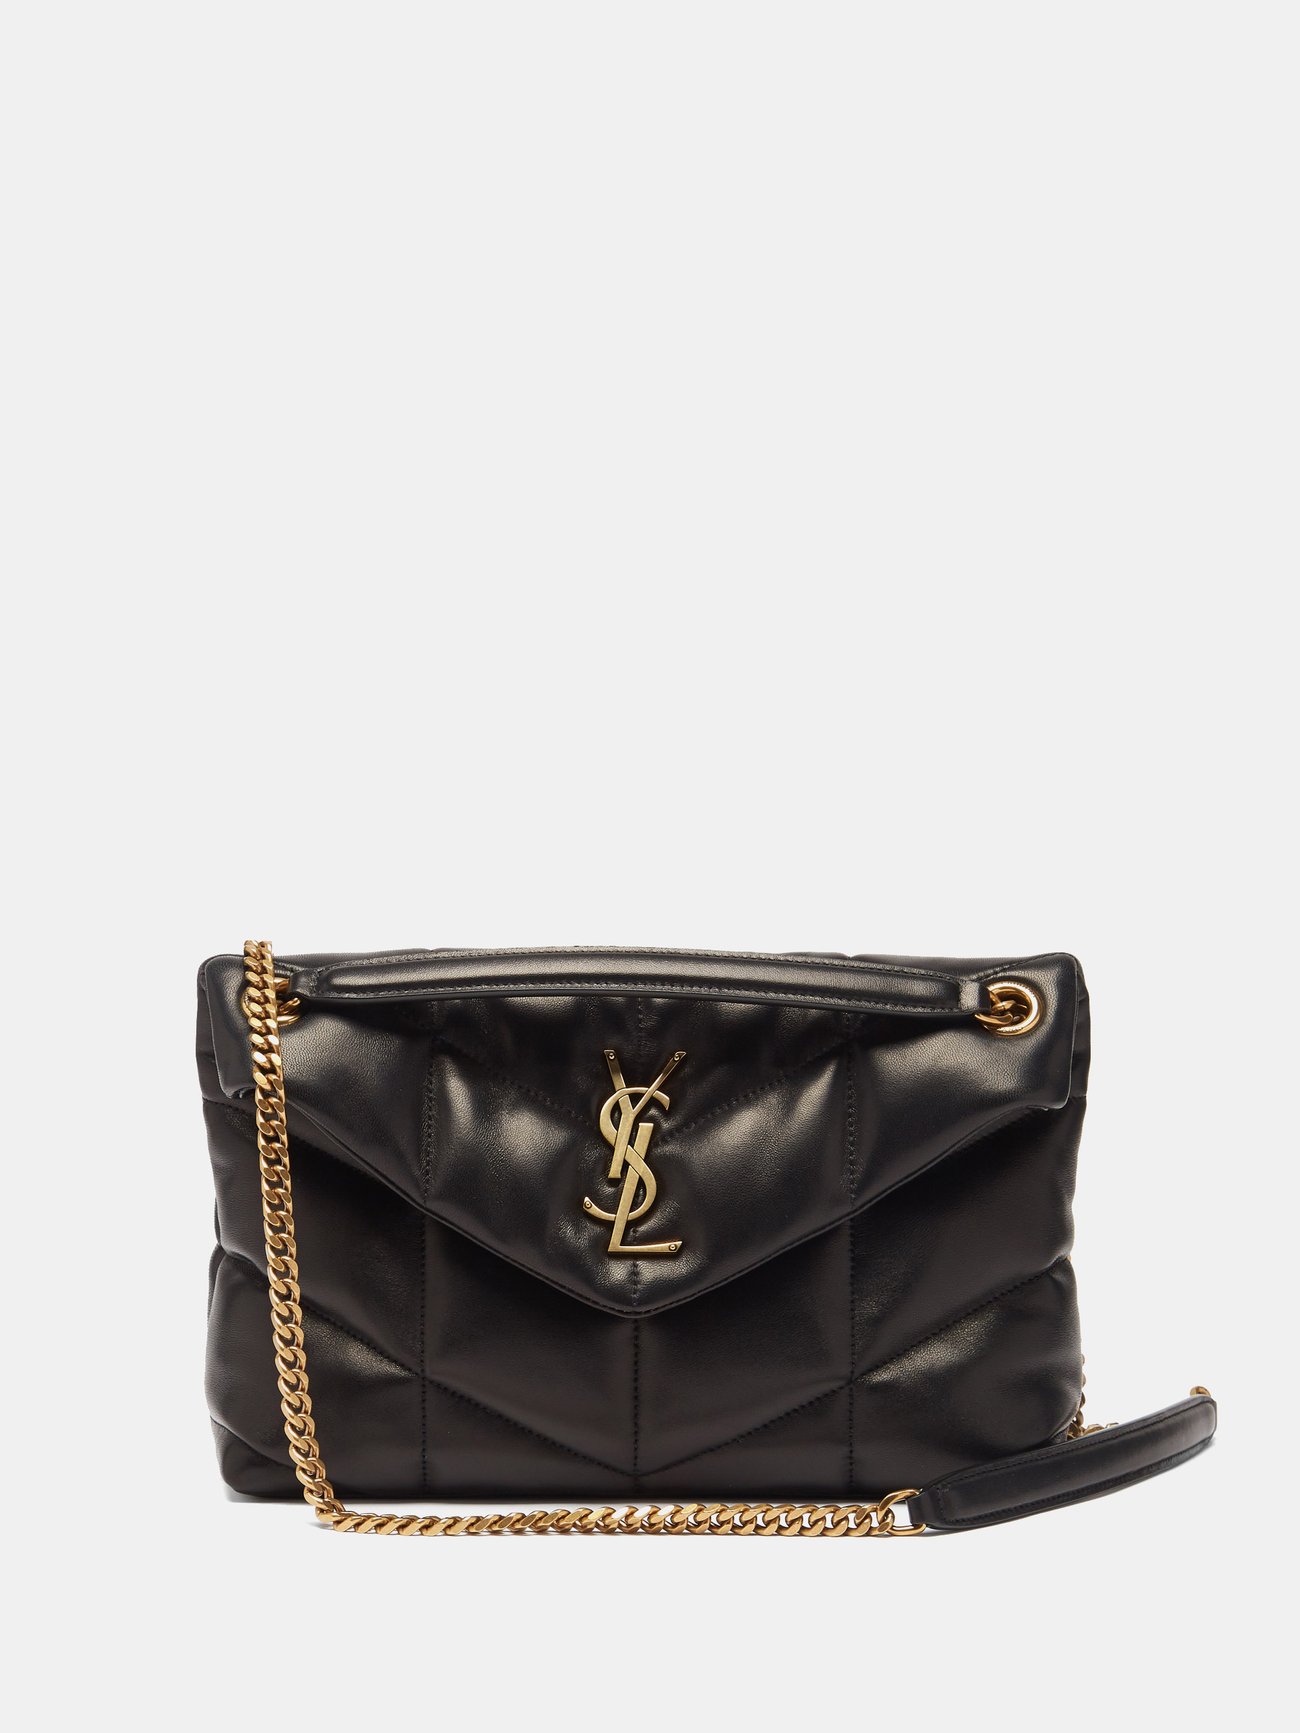 Saint Laurent Toy Ysl Quilted Puffer Chain Shoulder Bag